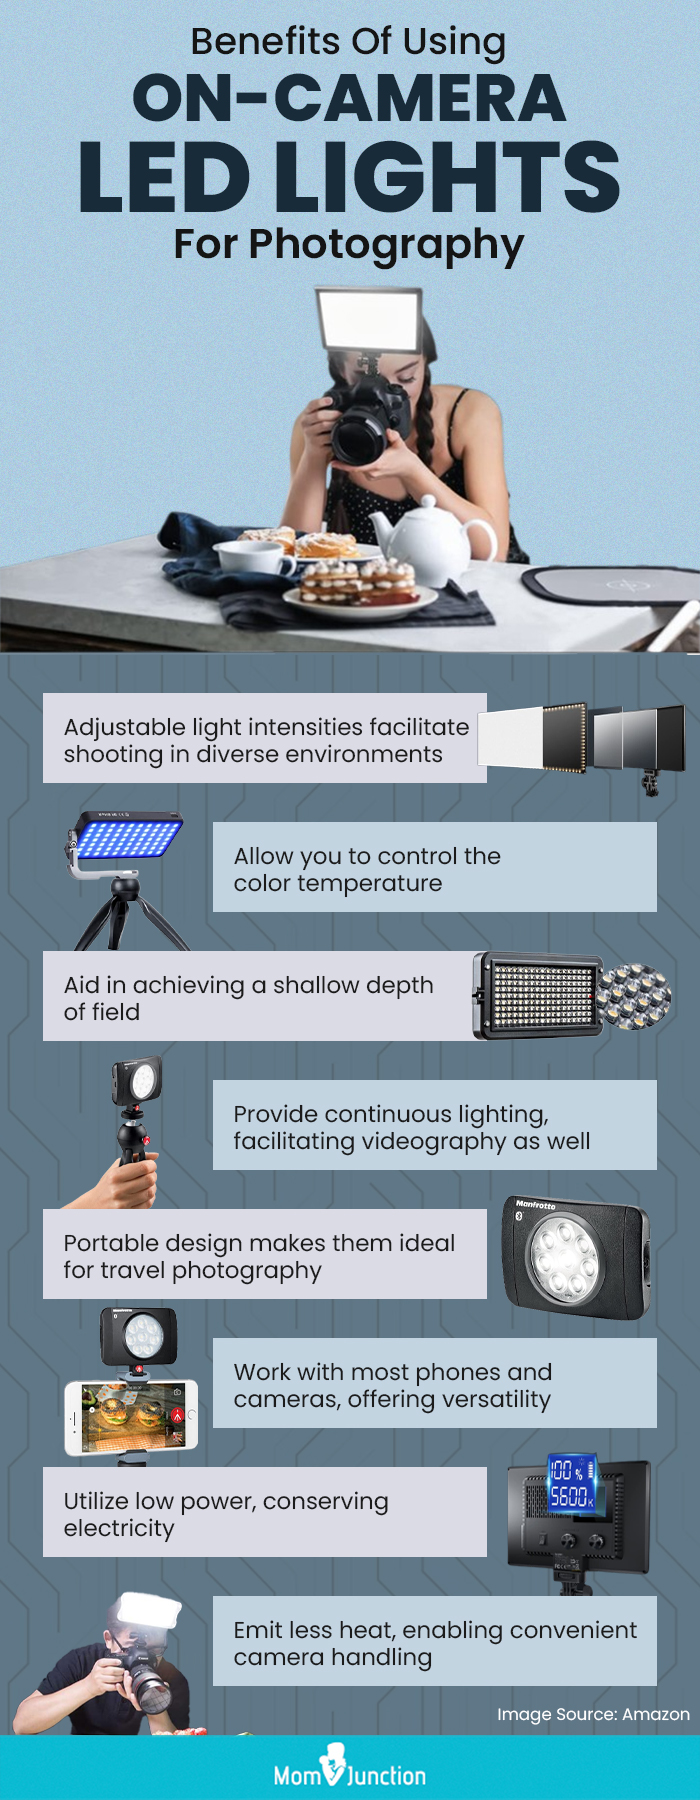 Benefits Of Using On-Camera LED Lights For Photography(infographic)